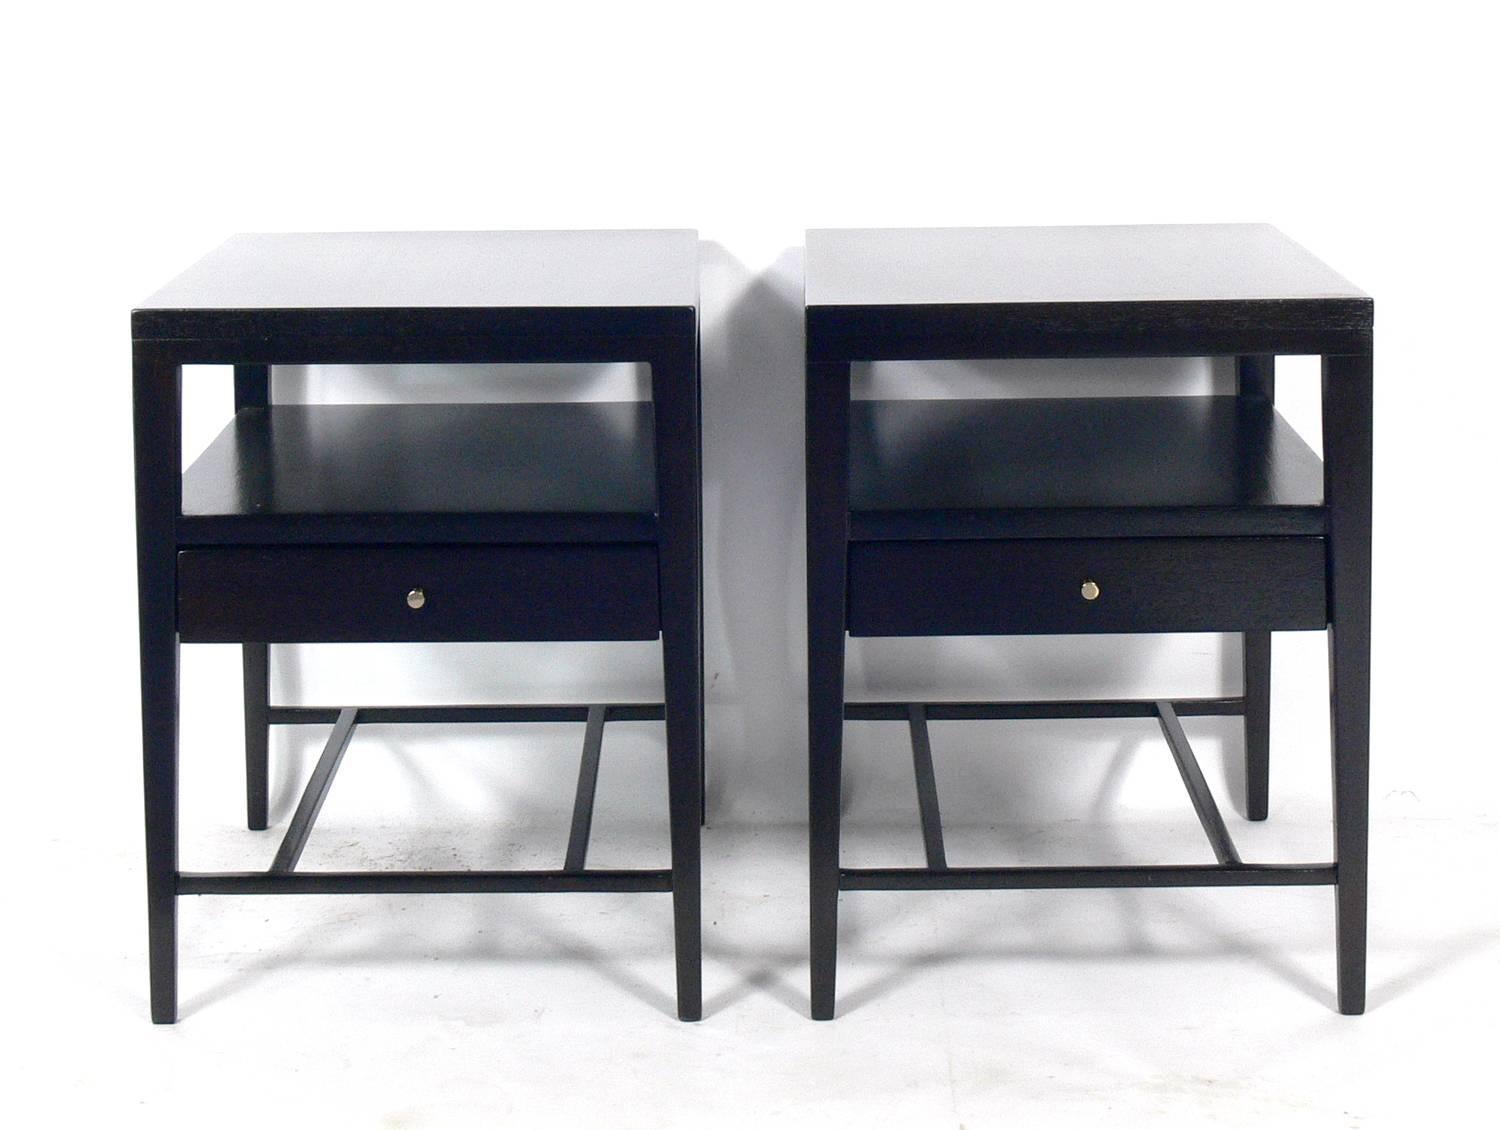 Pair of Clean Lined Night Stands or Side Tables, designed by Paul McCobb for Calvin, American, circa 1950s. They have been completely restored in an ultra deep brown color and the brass hardware has been polished and lacquered.